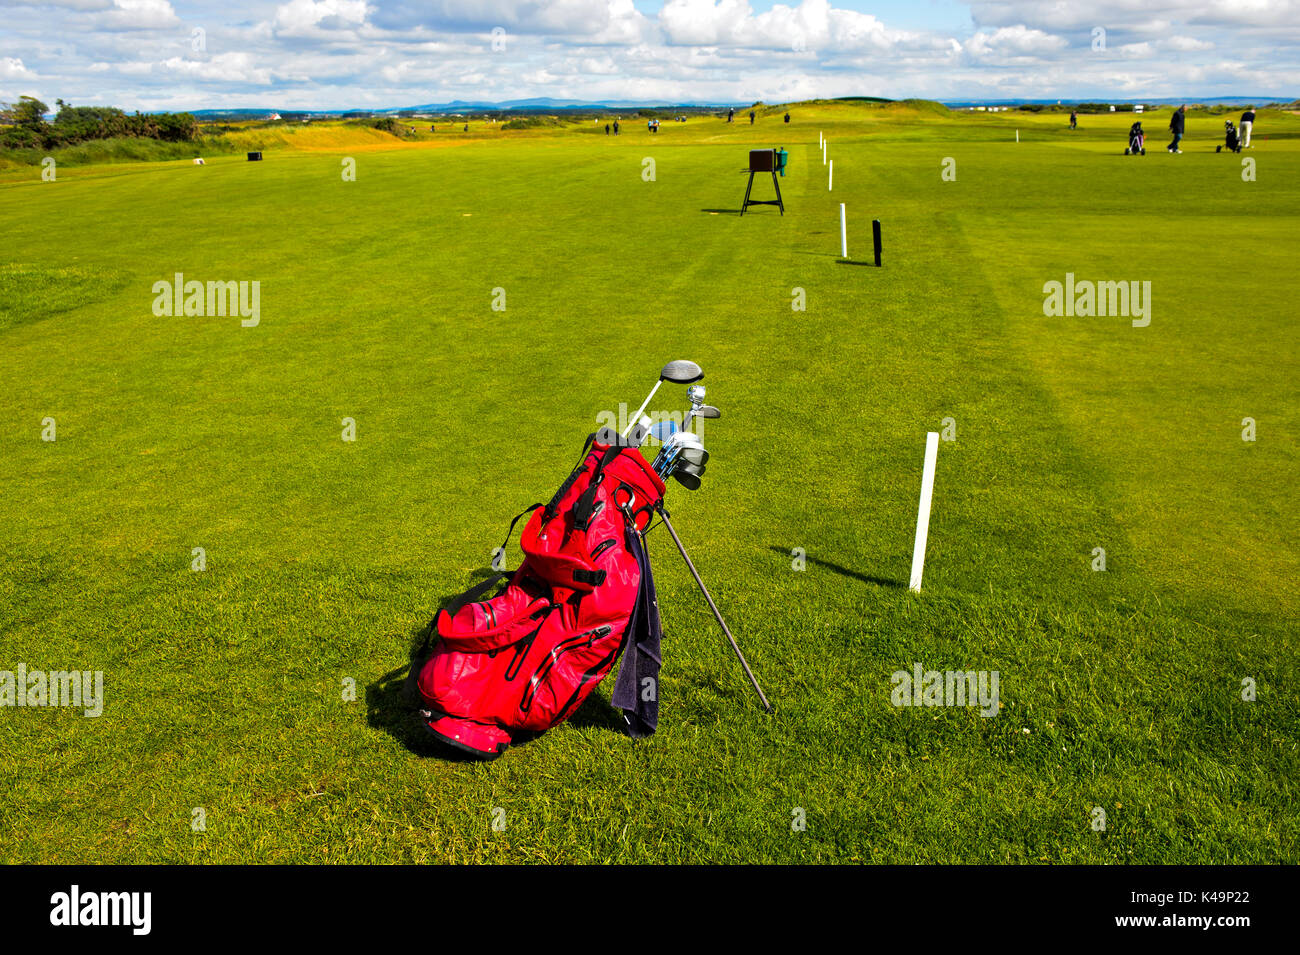 Teeing Ground Of Golf Course, Golf Course St Andrews Links, St Andrews, Fife, Scotland, Great Britain Stock Photo